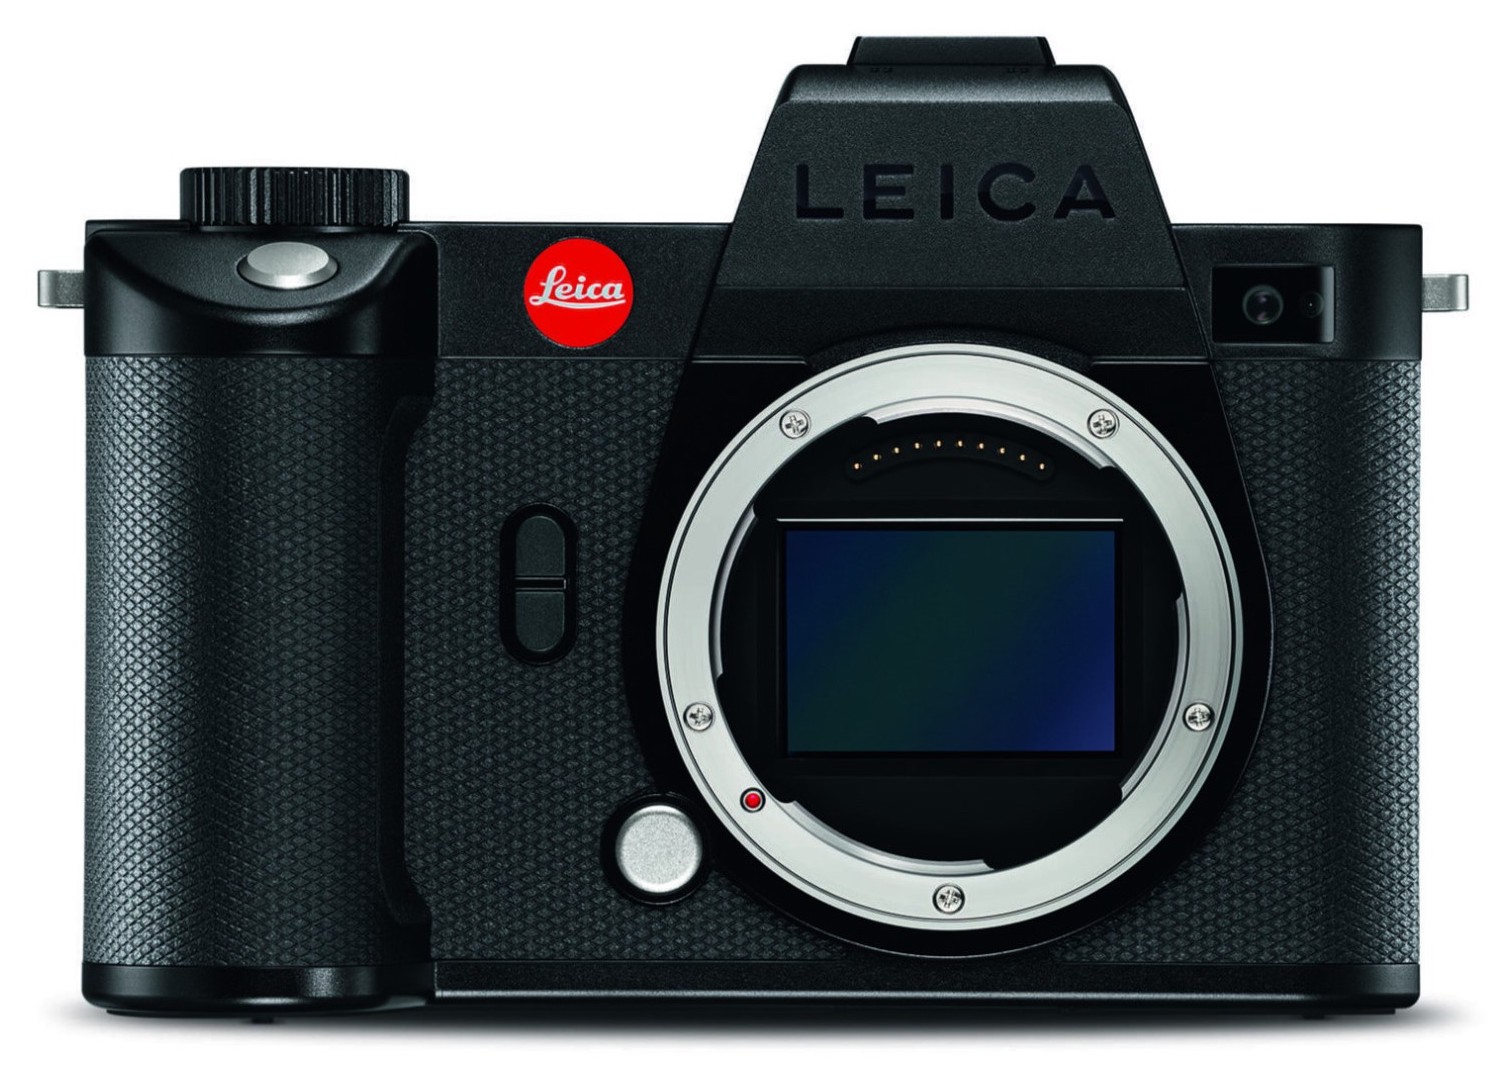 Leica SL2S camera with a 24 MP sensor coming soon new leaked photos